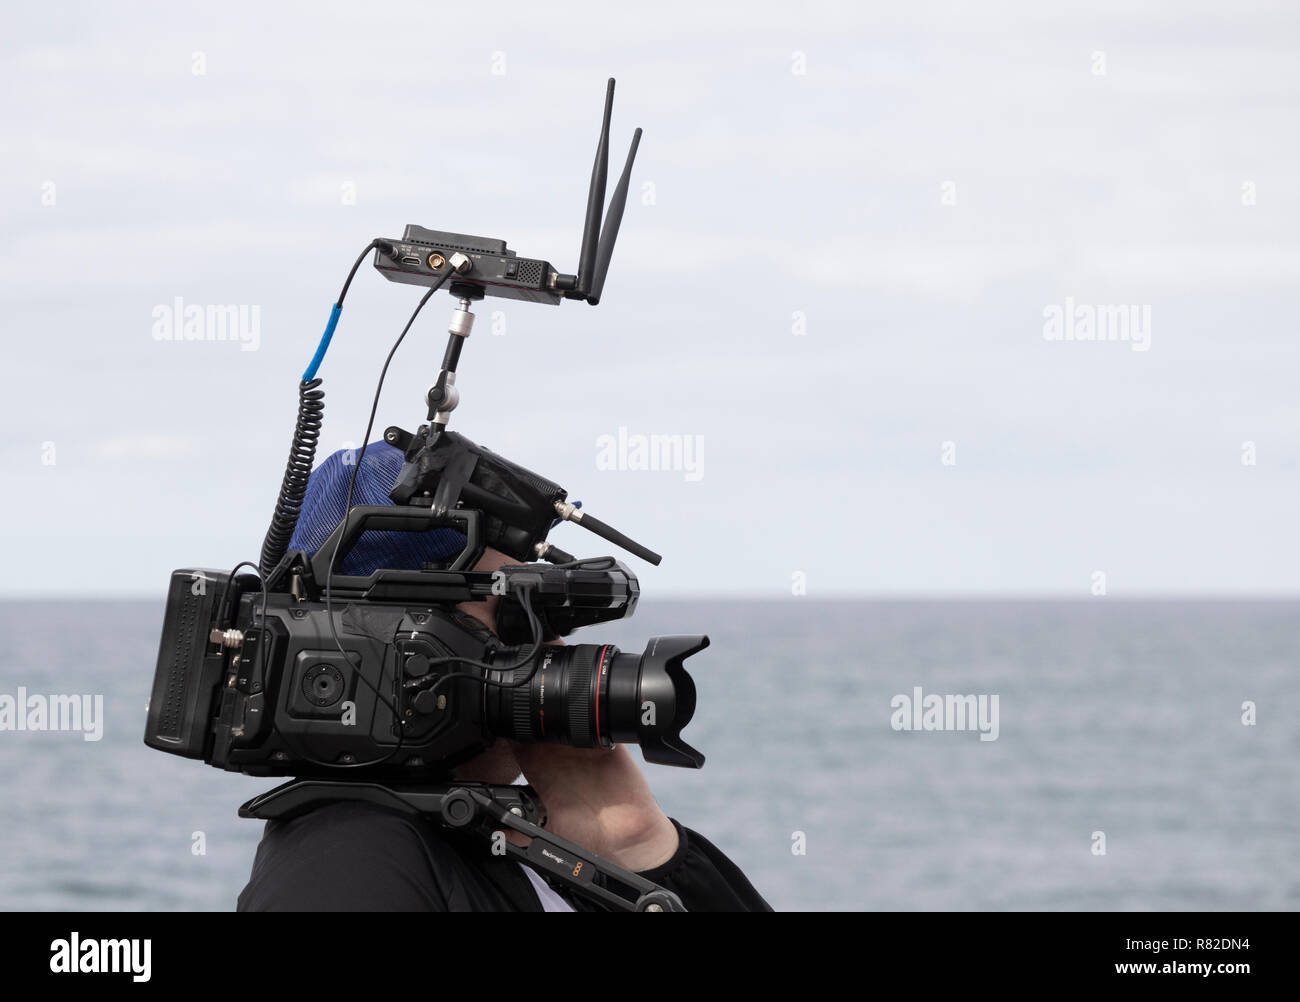 Video camera with wifi router streaming live coverage of surfing event. Stock Photo